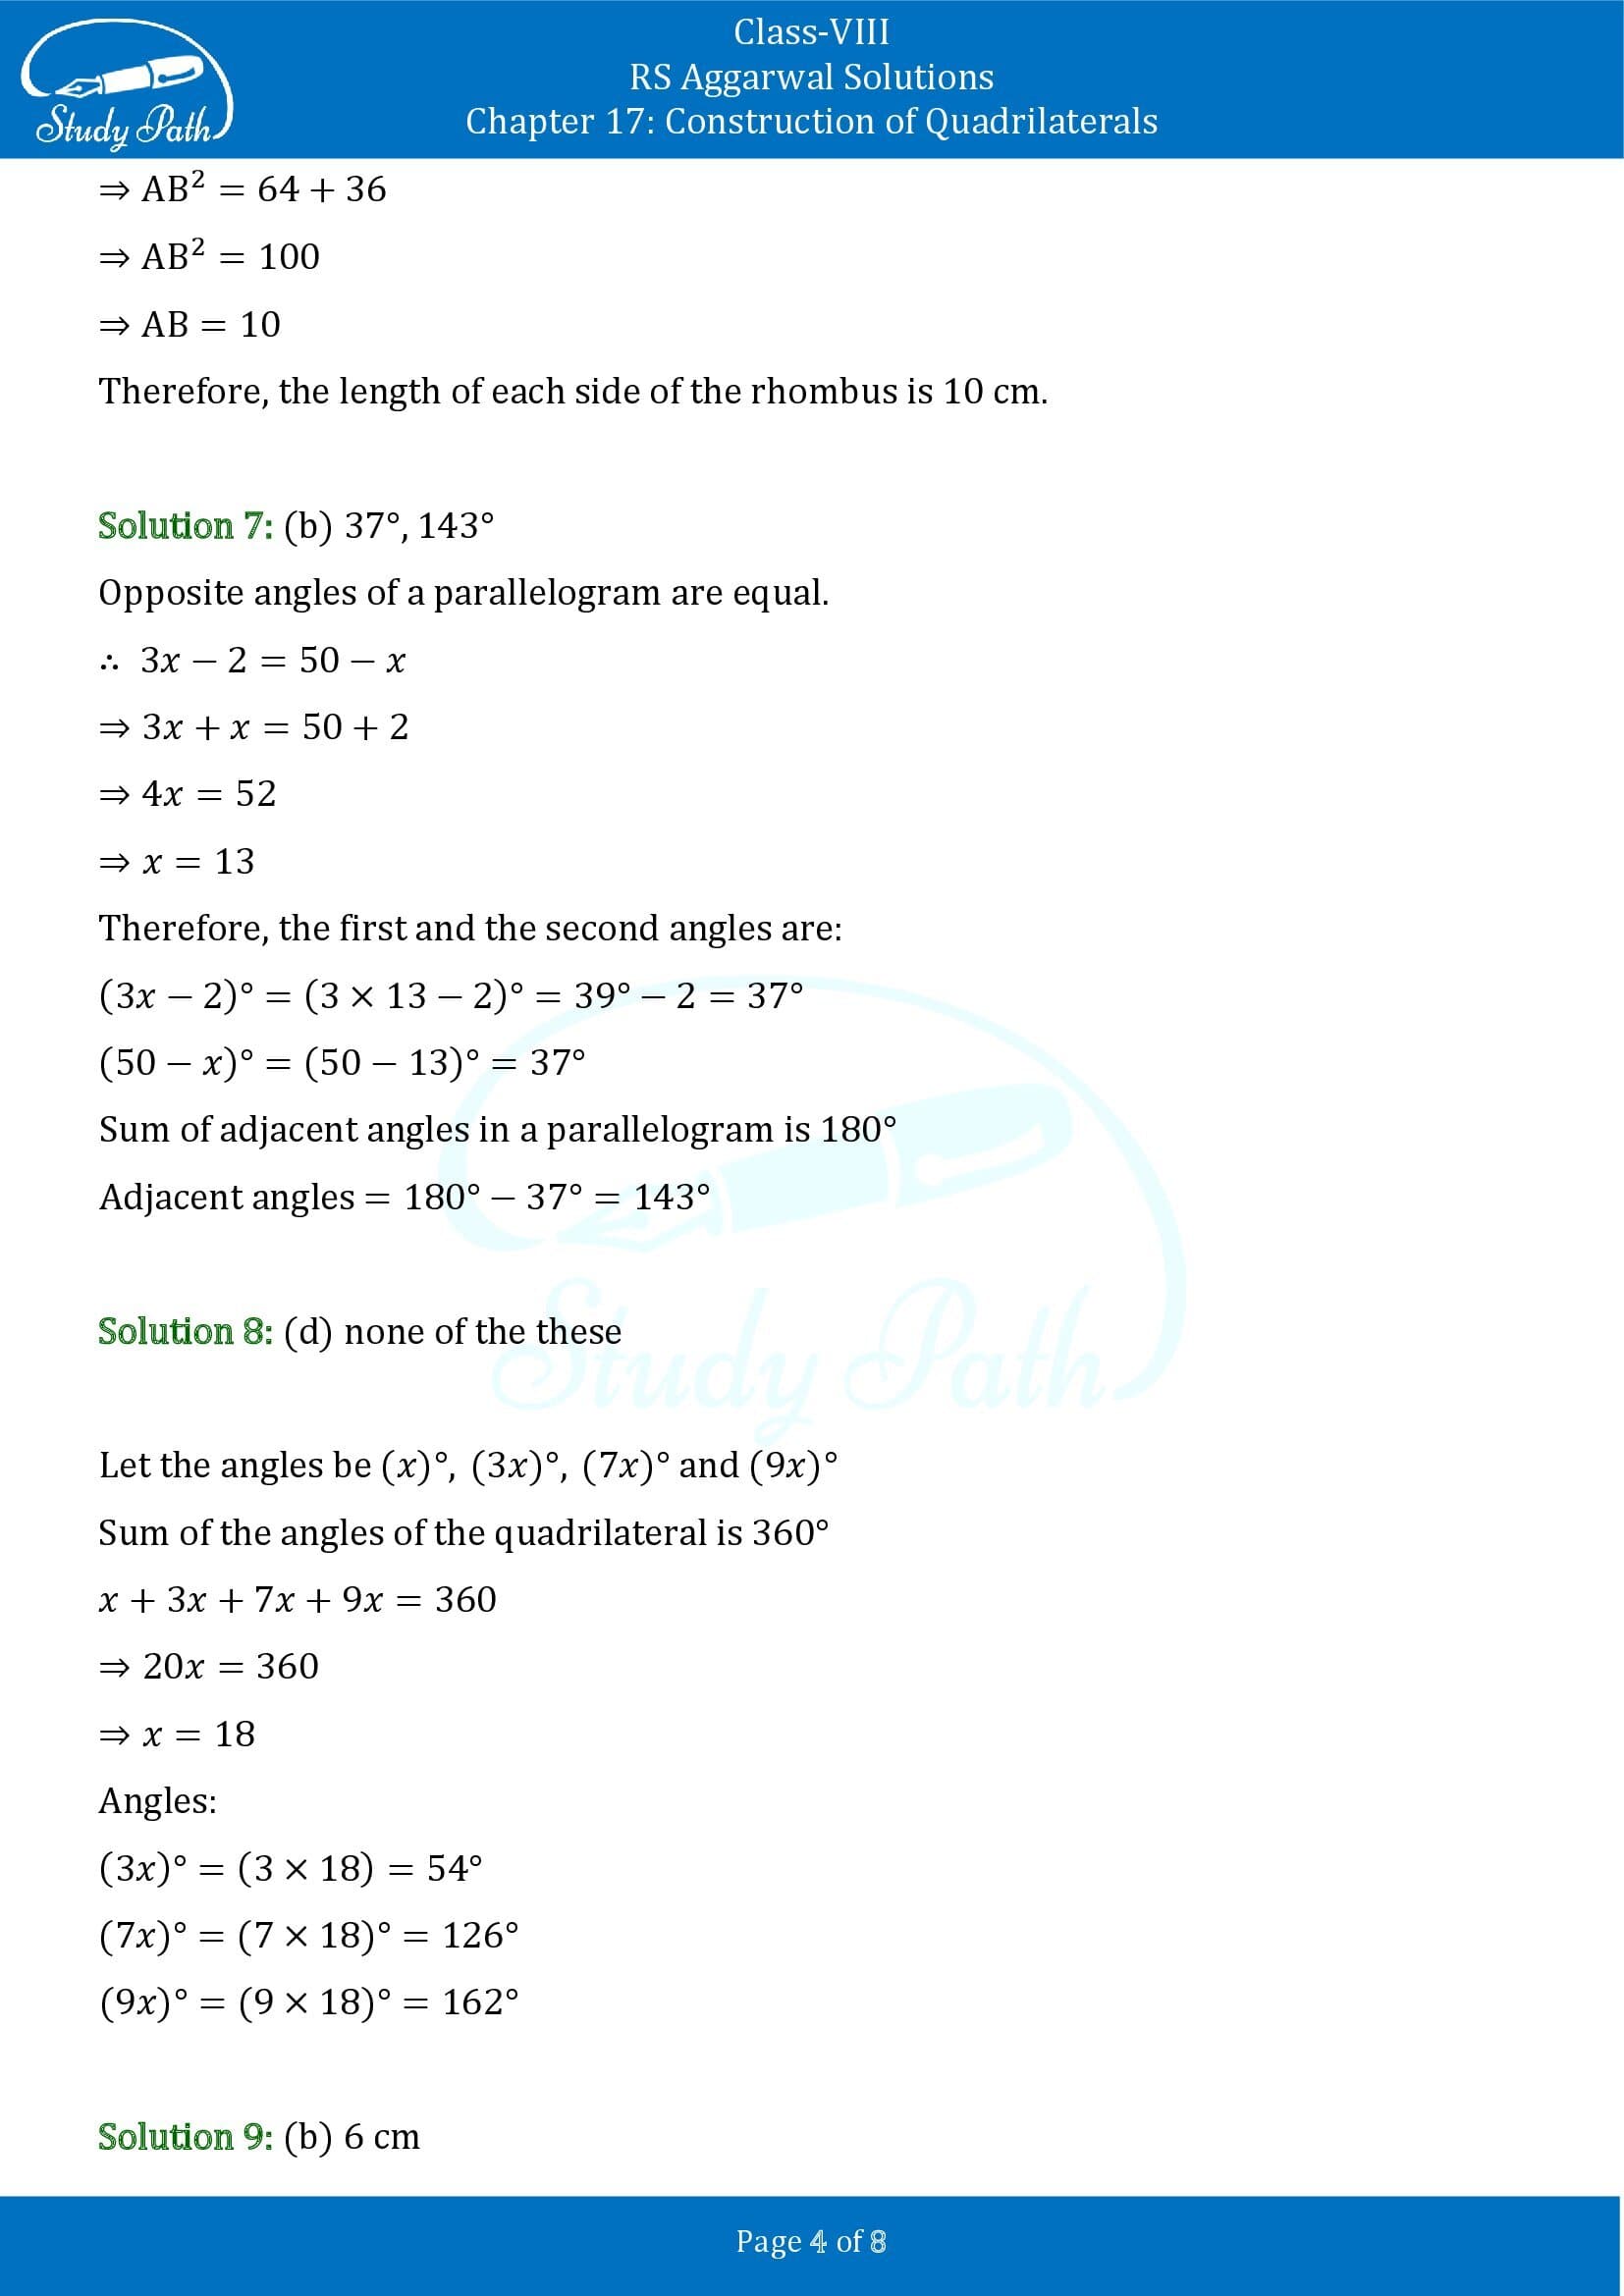 RS Aggarwal Solutions Class 8 Chapter 17 Construction of Quadrilaterals Test Paper 0004